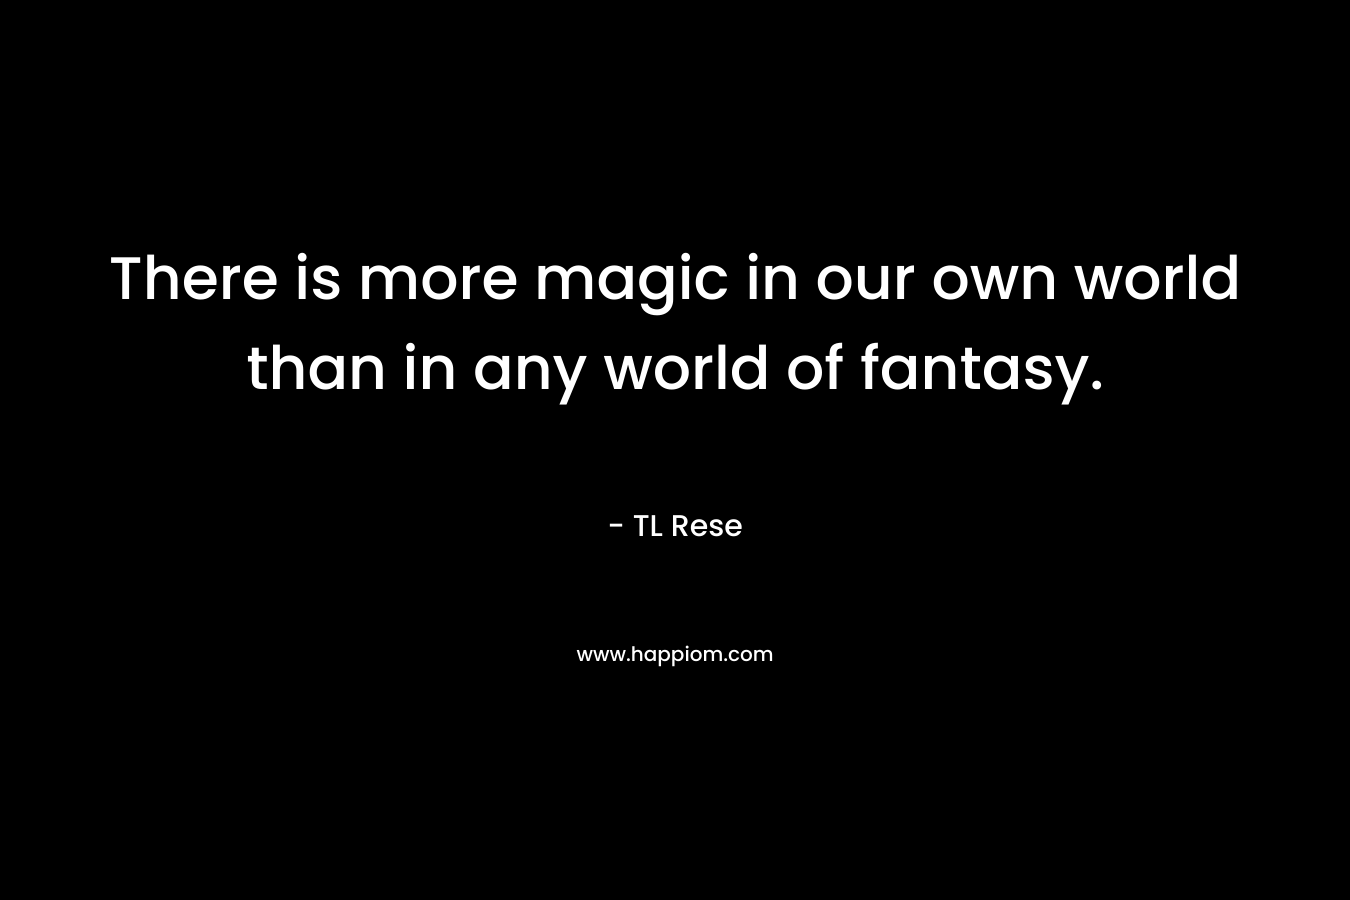 There is more magic in our own world than in any world of fantasy.